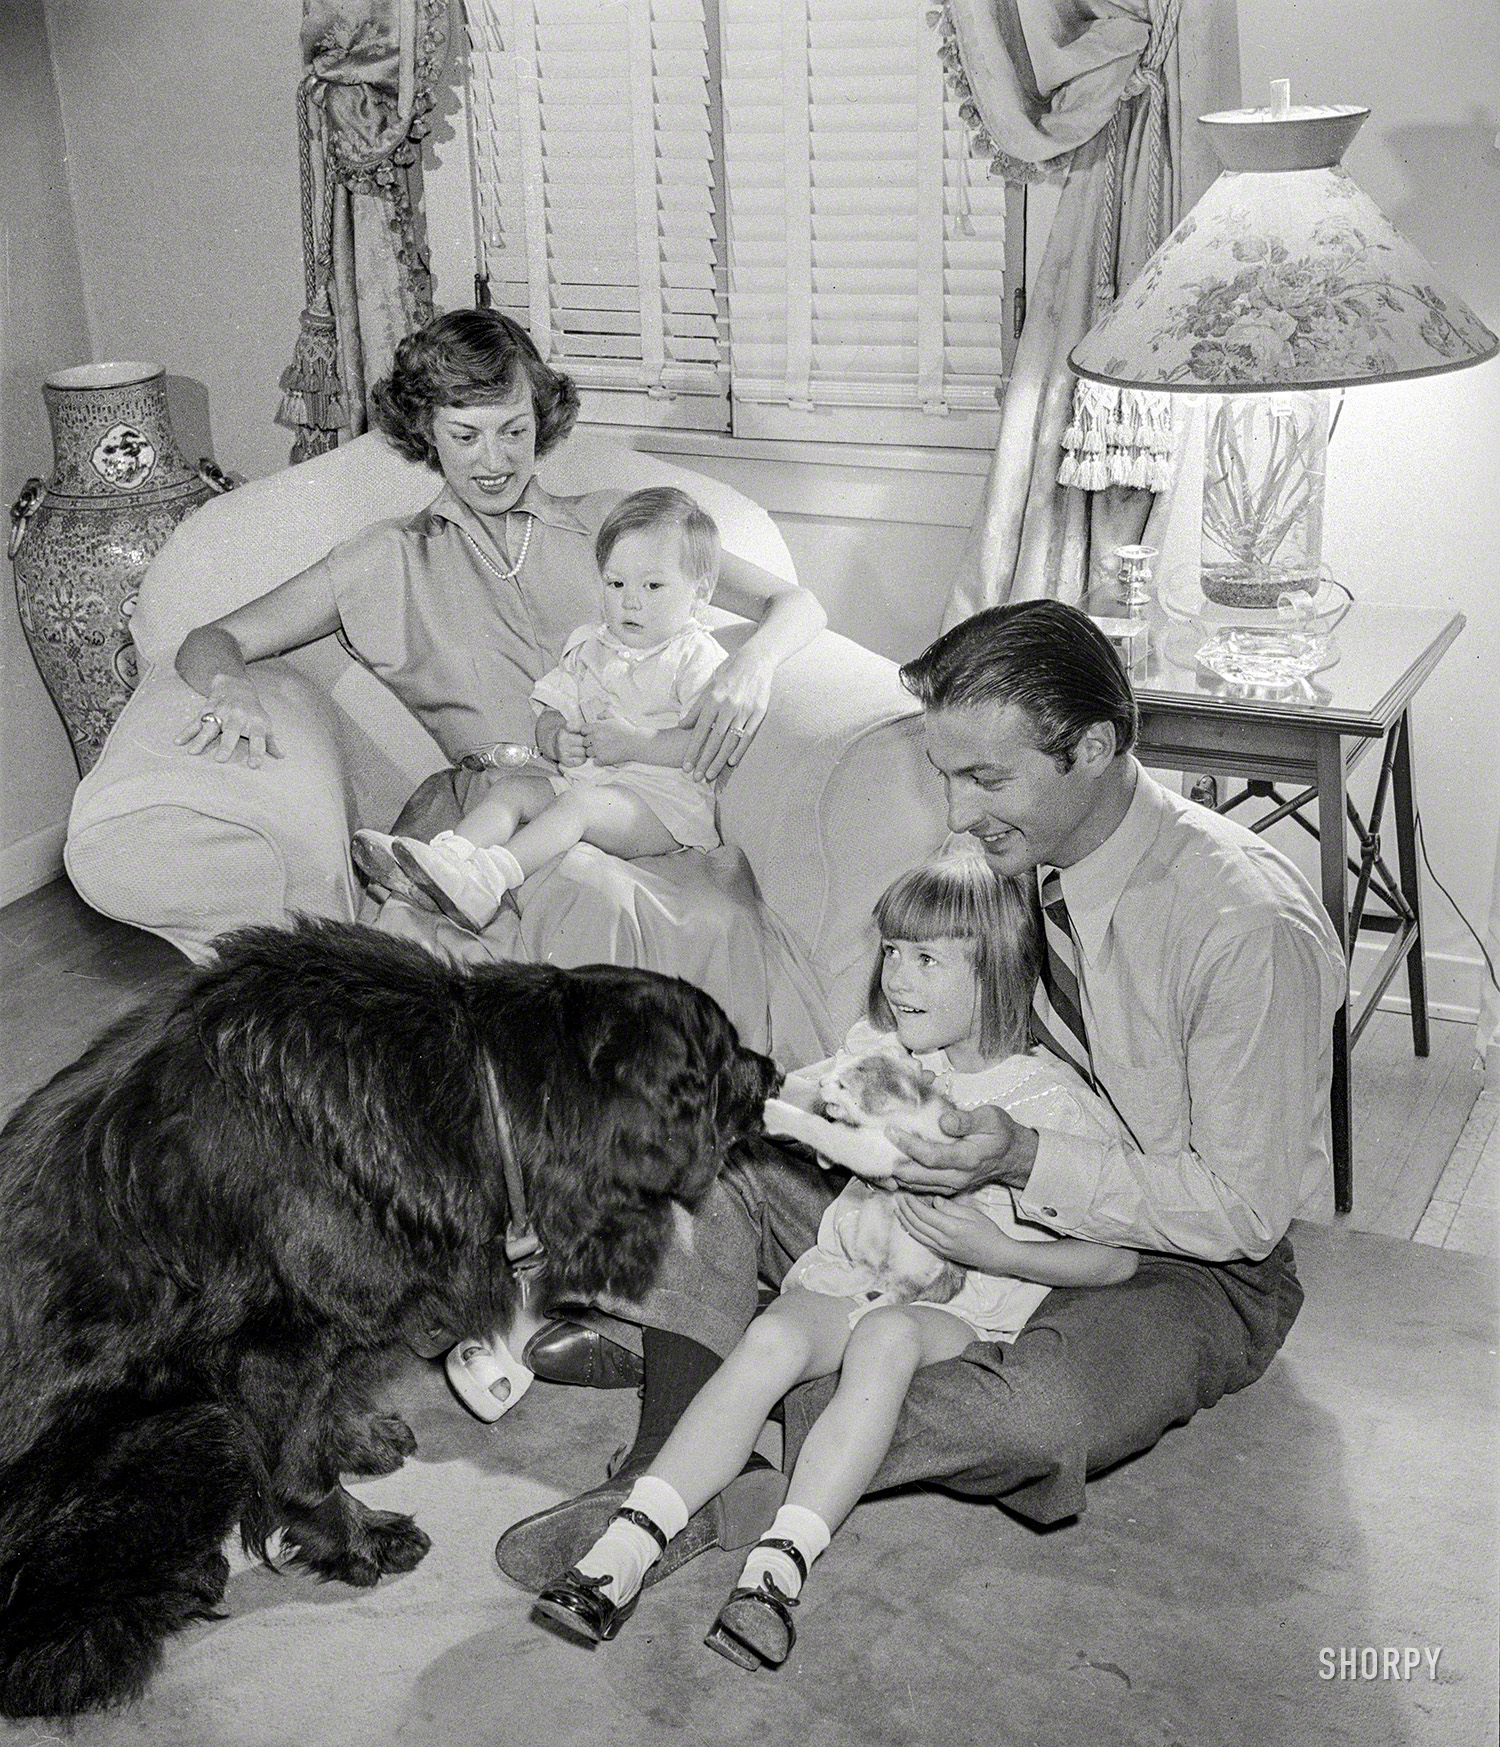 Los Angeles, 1948. "Actor Lex Barker and his family -- wife Constance Rhodes Thurlow, son Alexander Crichlow Barker III, and daughter Lynn Thurlow Barker with their dog and cat." From photos by Maurice Terrell for the Look magazine assignment "Princeton-Bred Tarzan." View full size.